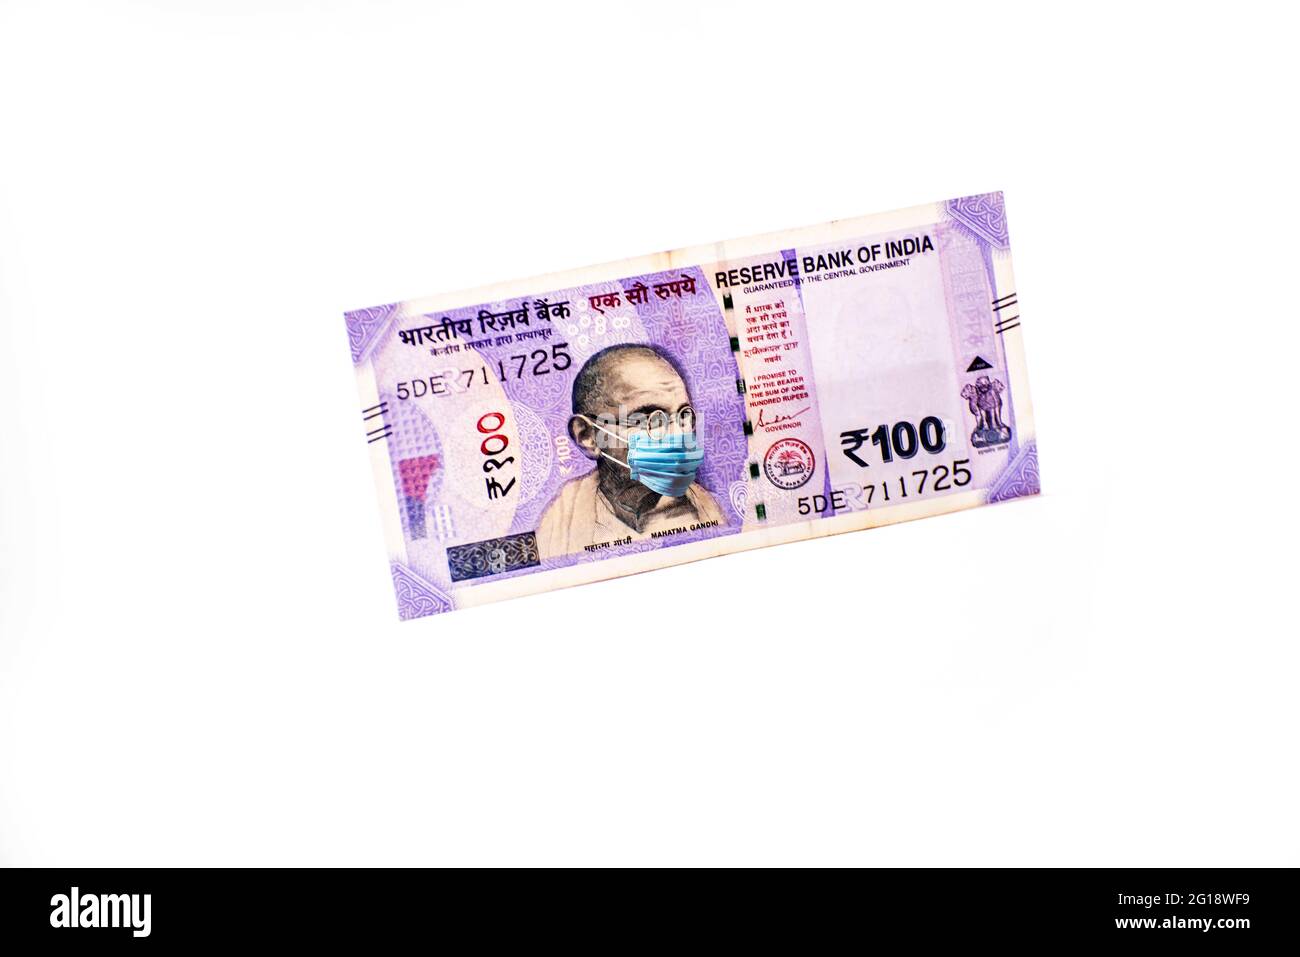 Mahatma Gandhi with face mask against Coivd-19 infection. Global economy hit by corona virus outbreak. Stock Photo